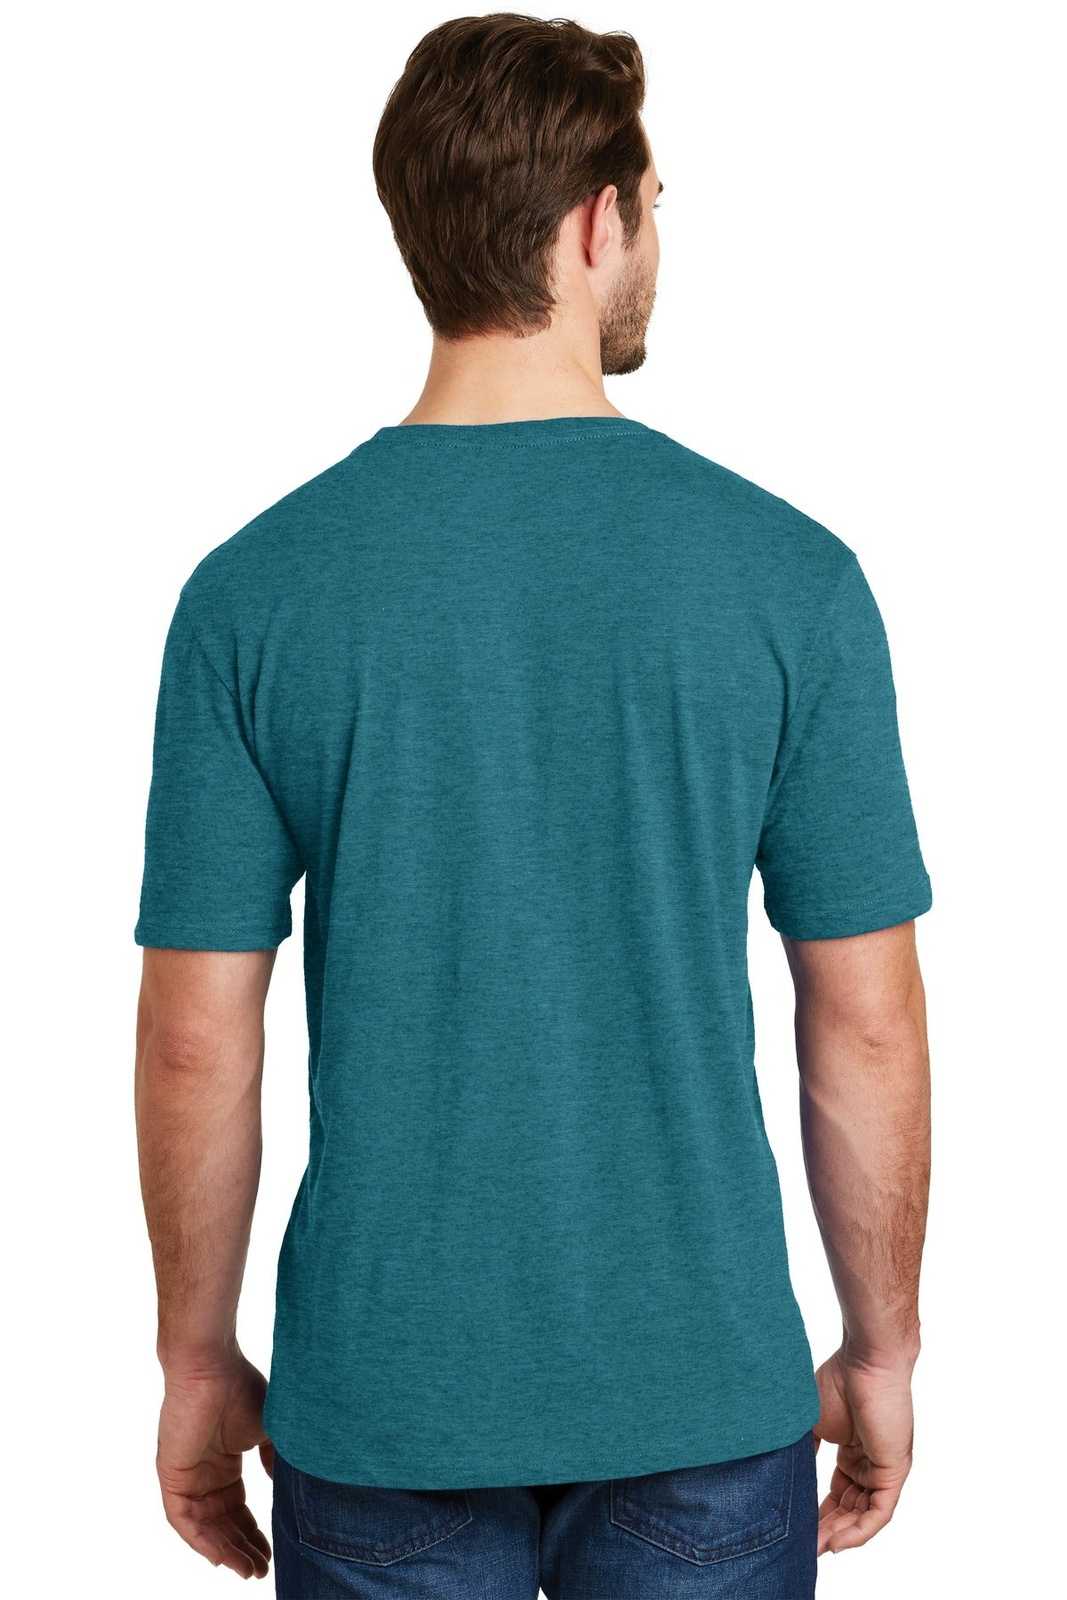 District DM108 Perfect Blend Tee - Heathered Teal - HIT a Double - 1